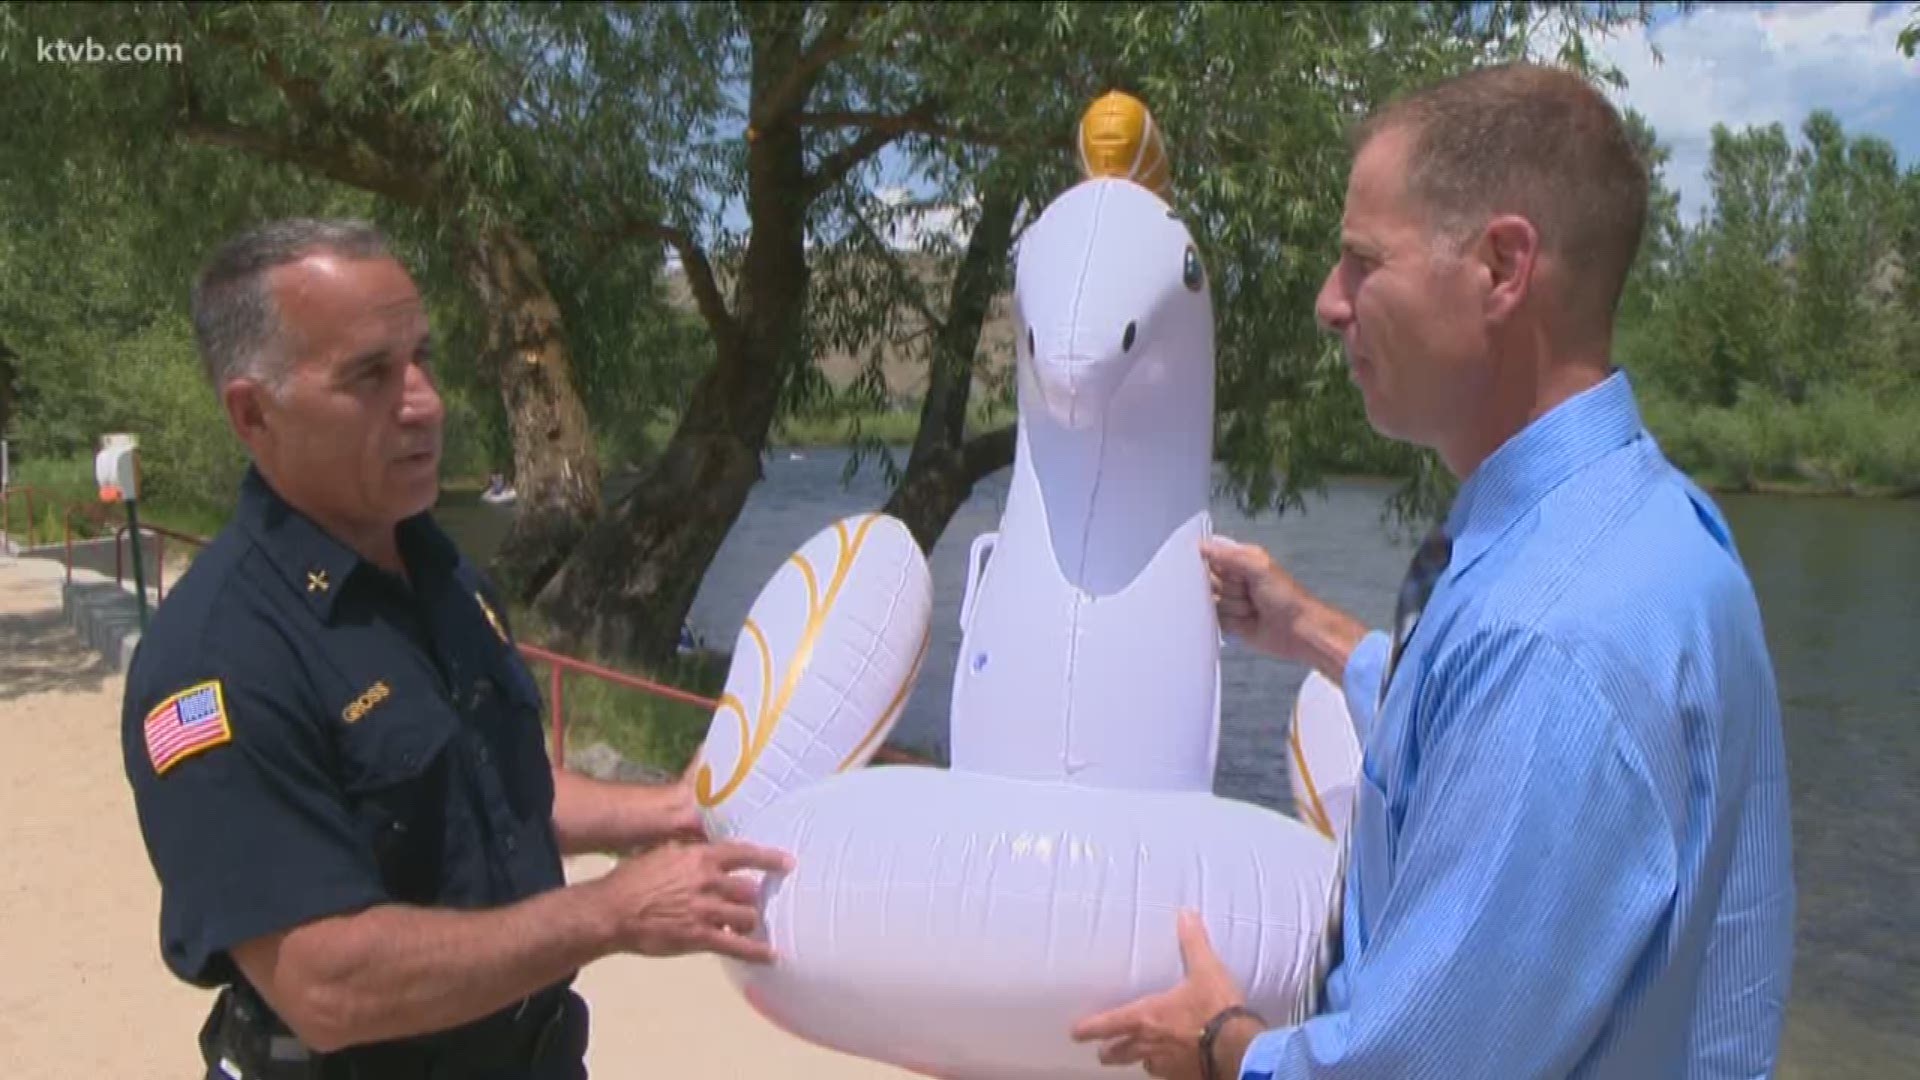 Inflatable unicorns and air mattresses are less than ideal on the Boise River, according to Boise Fire. People should avoid using pool toys when floating the river.